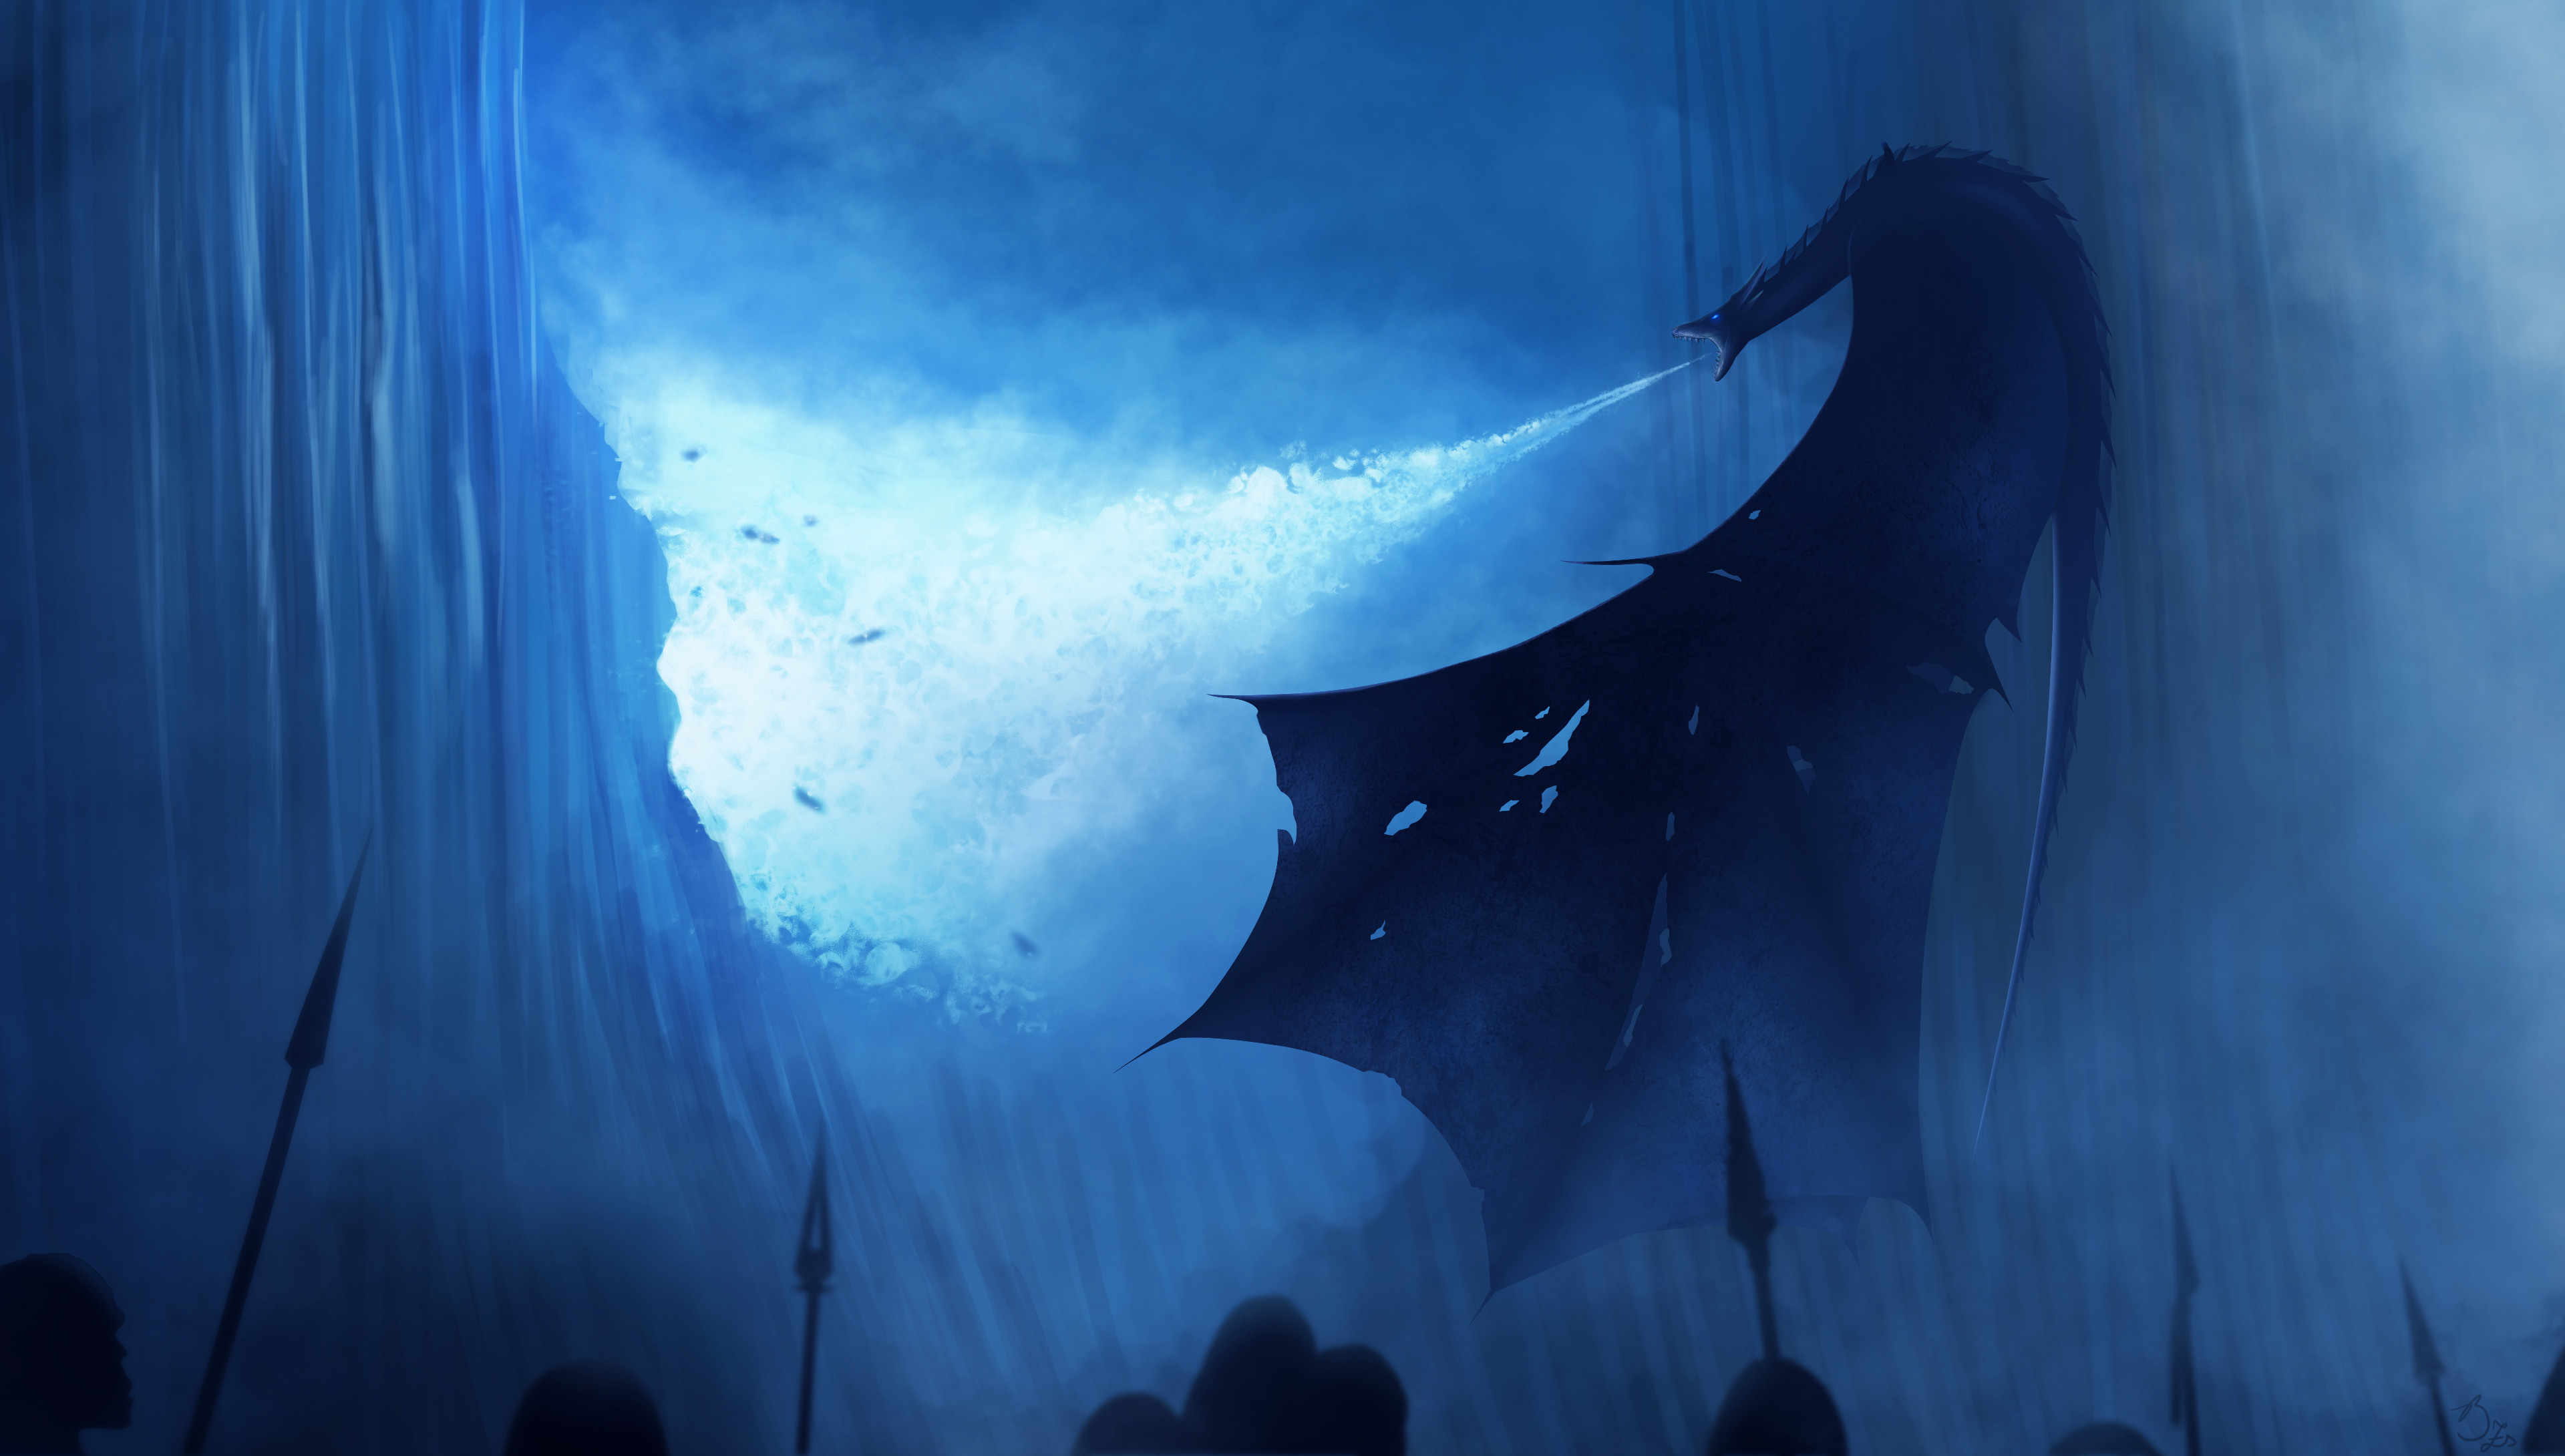 3212 Game Of Thrones HD Wallpapers Background Images   Wallpaper